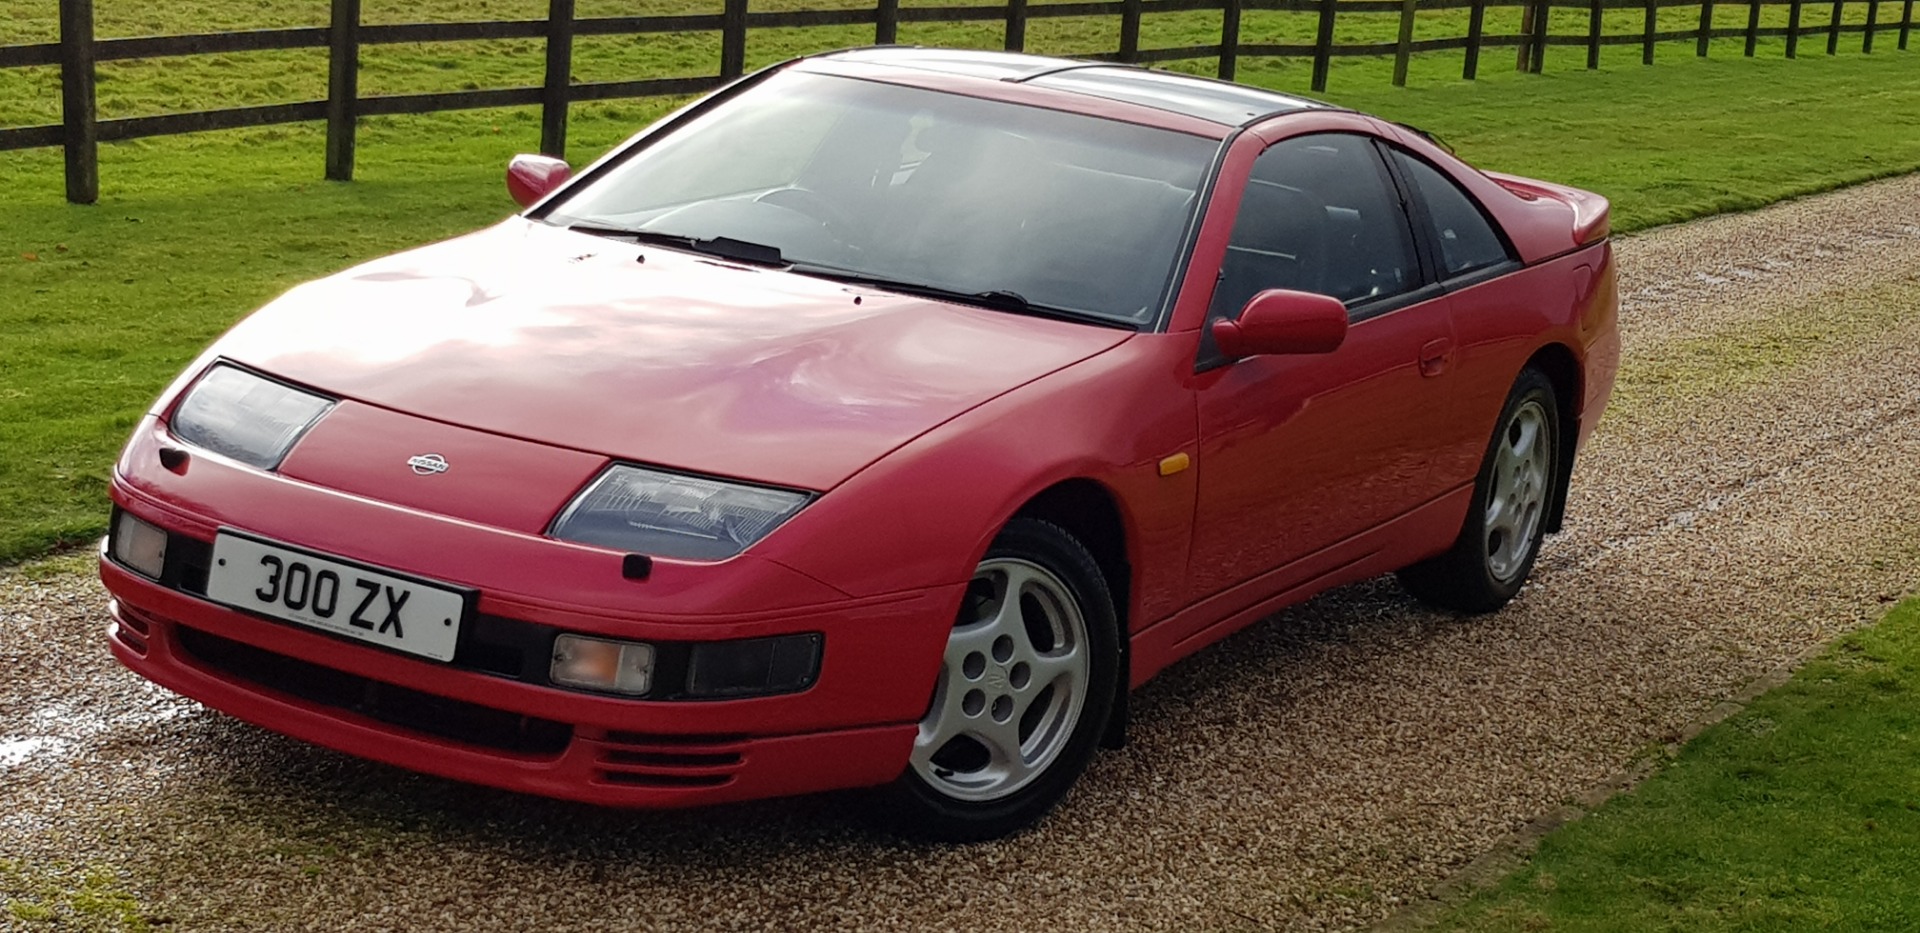 Used NISSAN 300 ZX 300 ZX TWIN TURBO UK CAR, RED WITH BLACK 